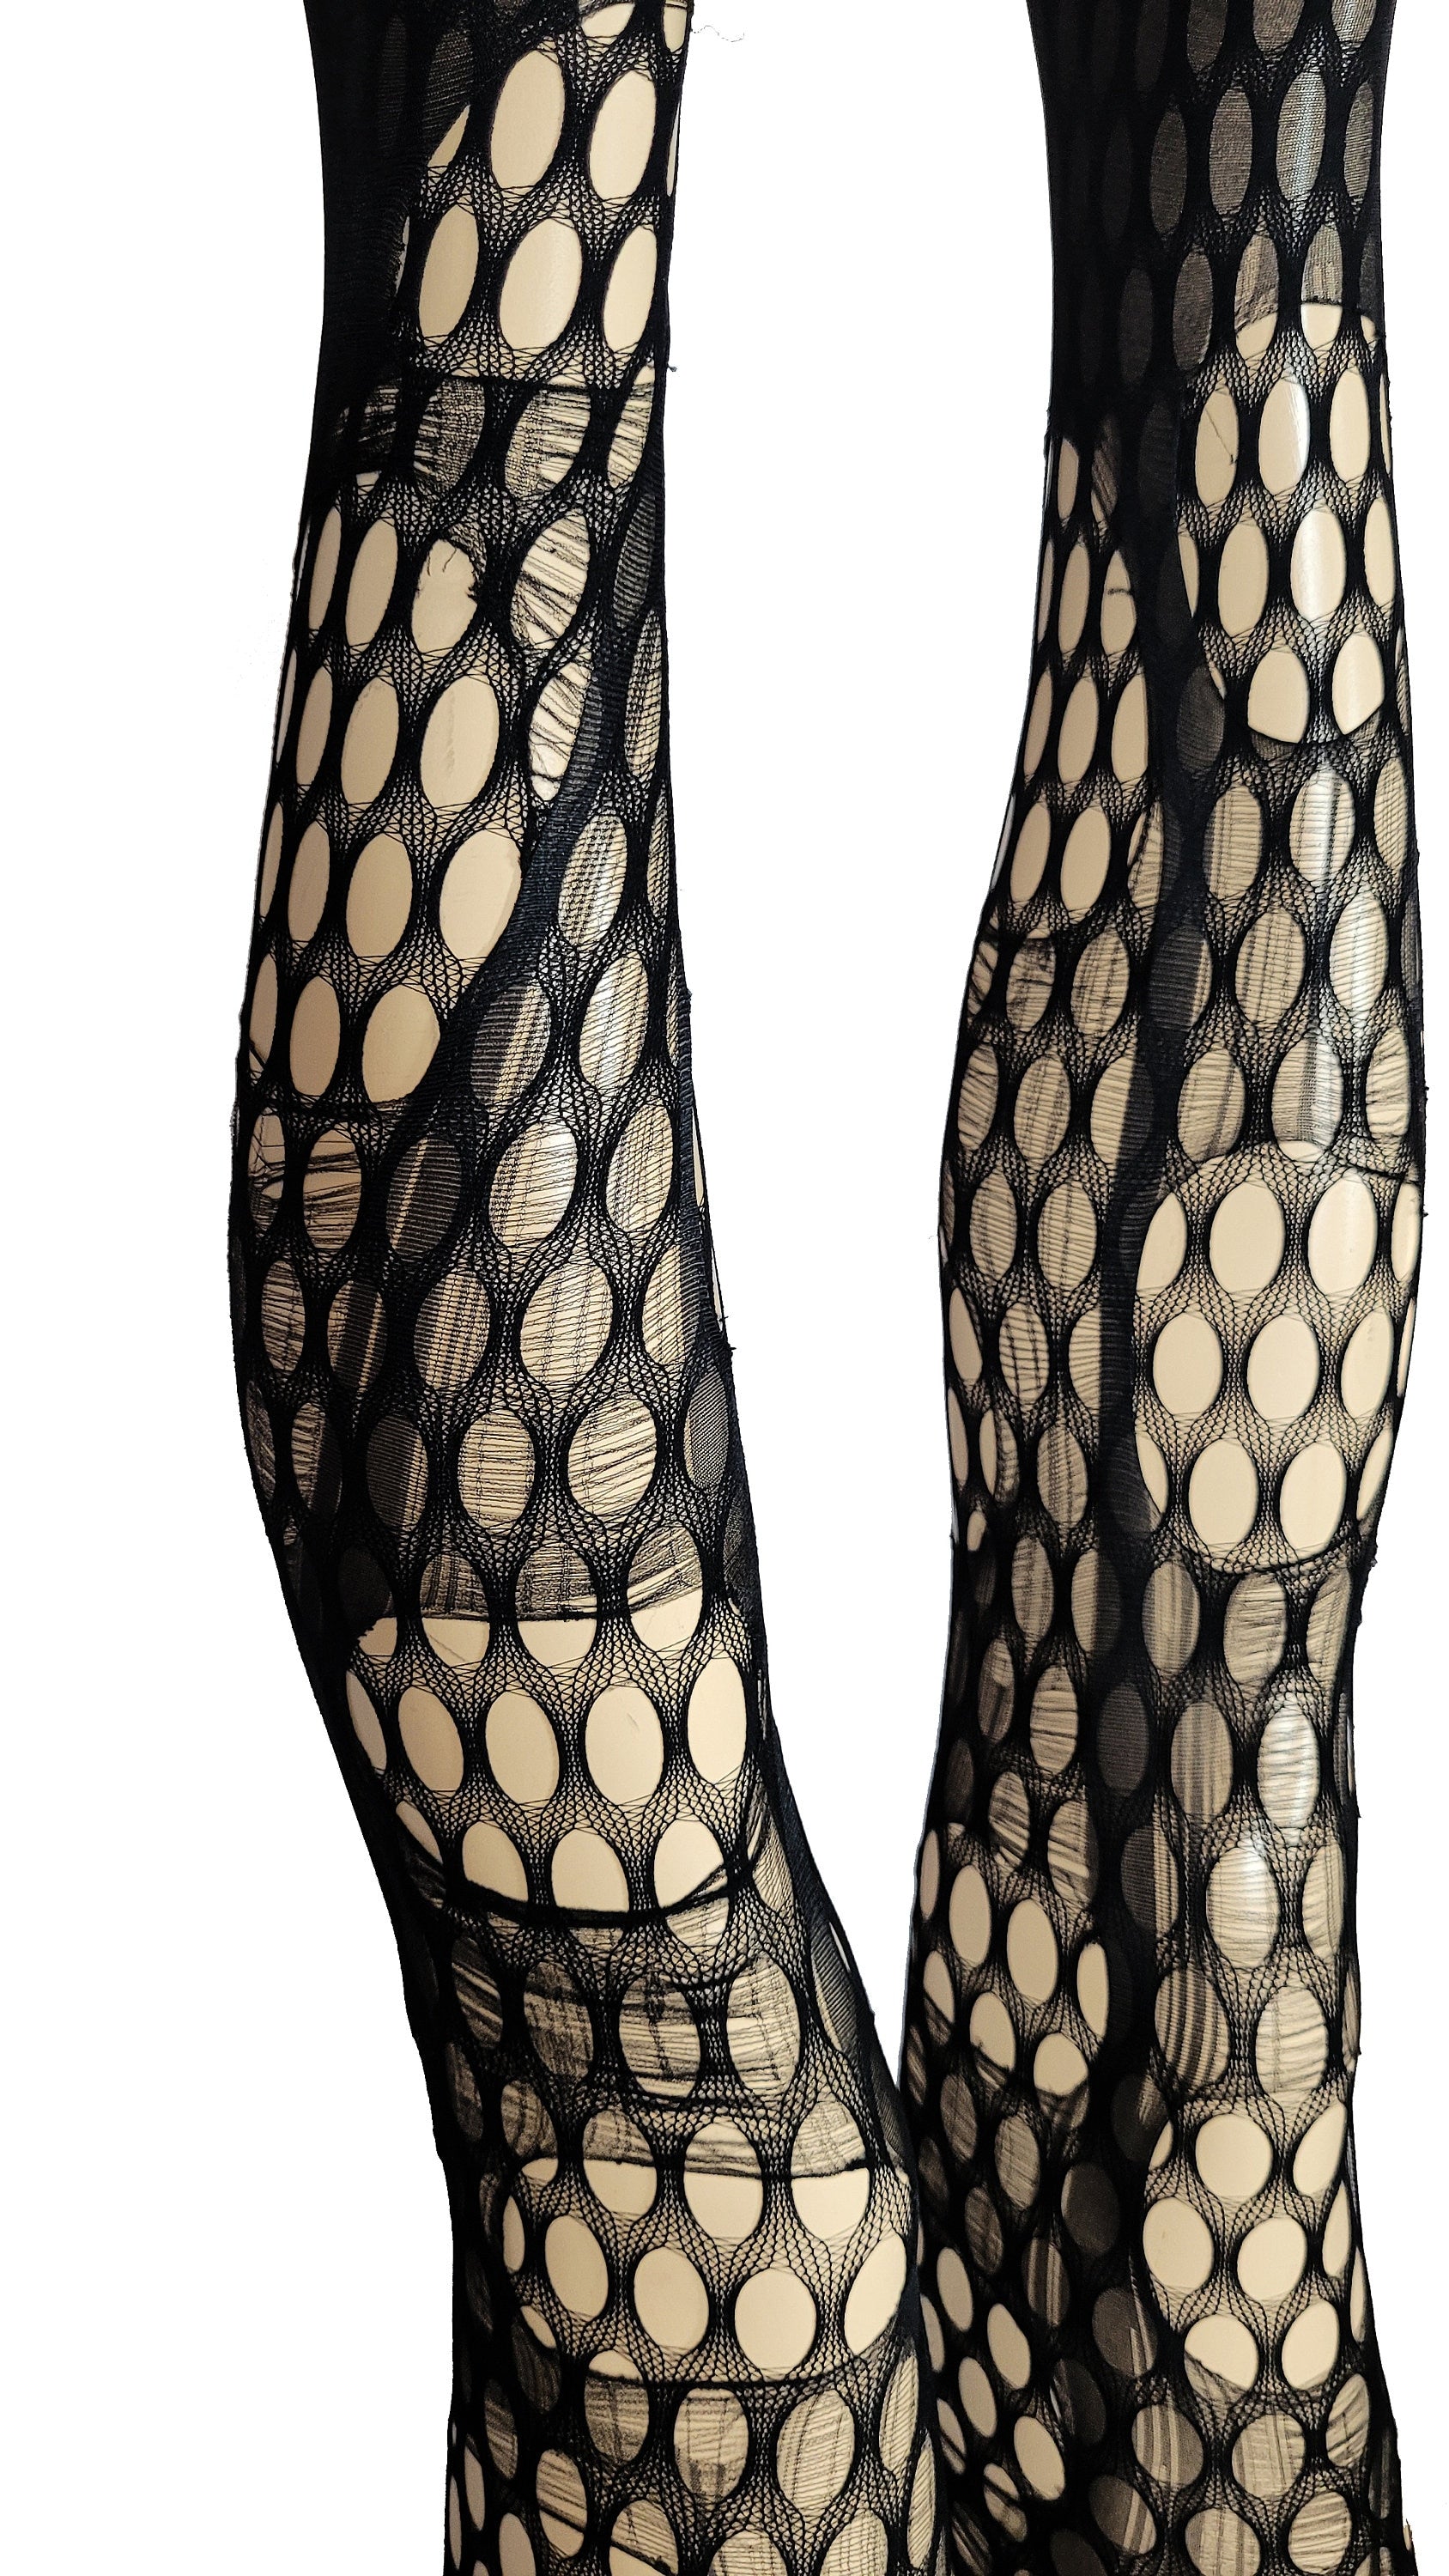 Double Layered Nu Goth Tights Torn Fishnet Stockings Witch Tights